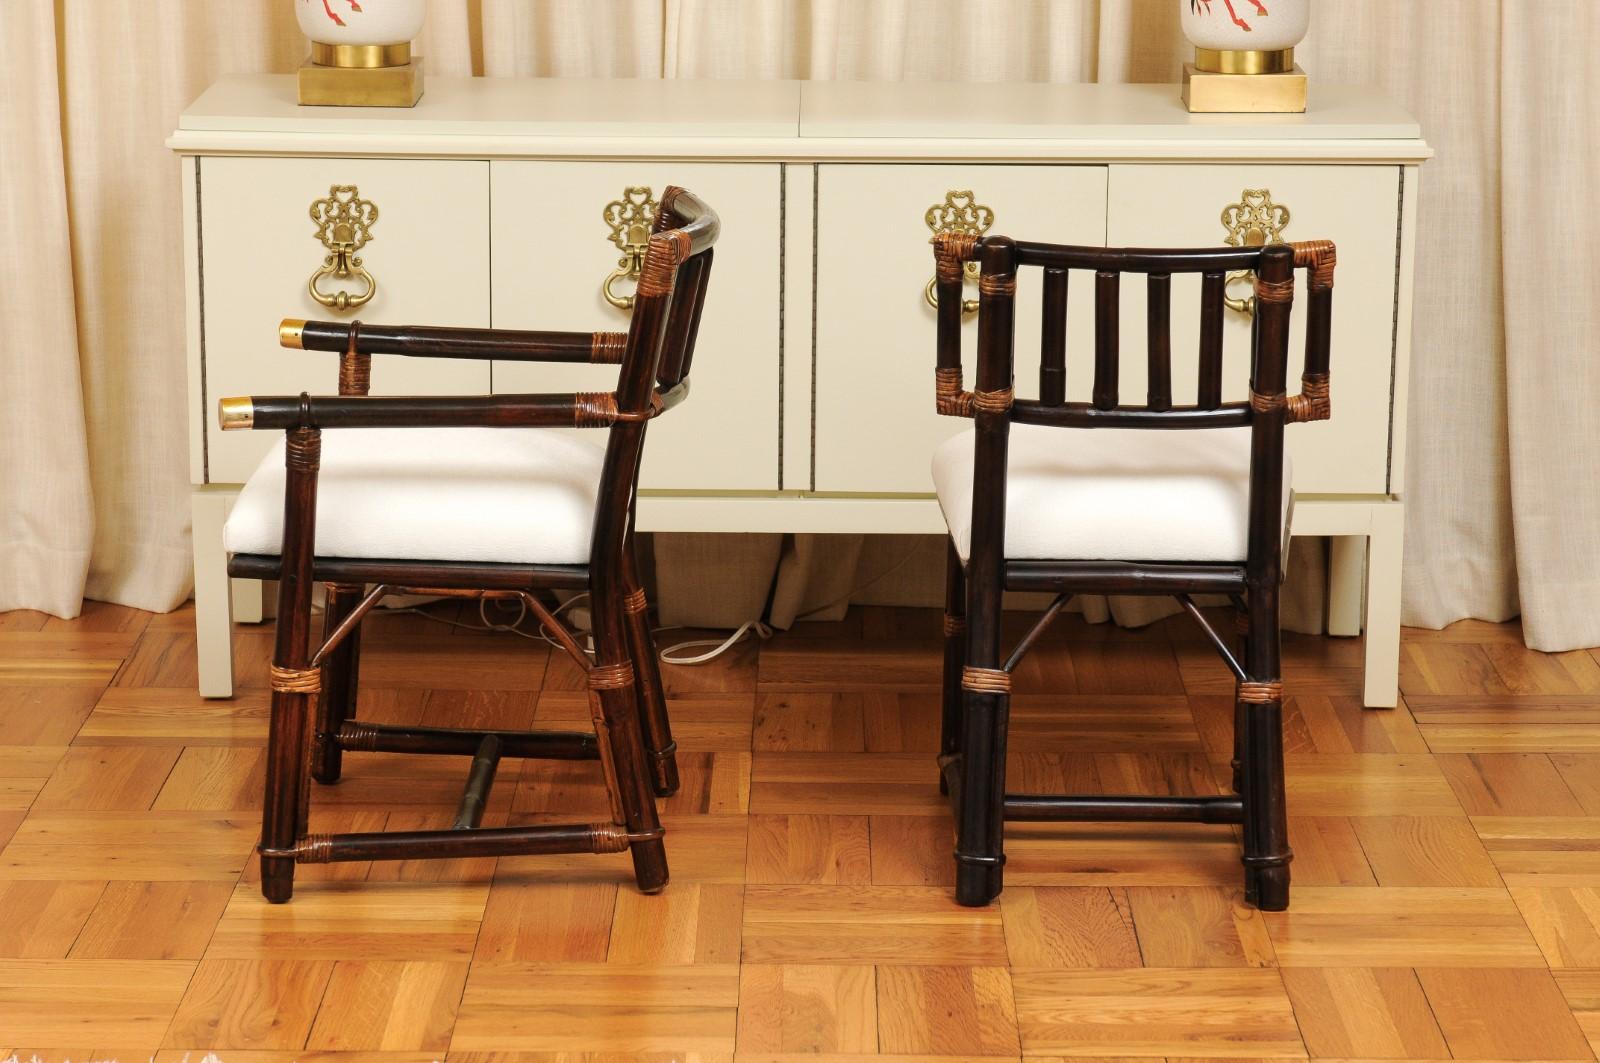 Radiant Set of 14 Rattan Chairs in Cordovan and Caramel by Wisner for Ficks Reed For Sale 5